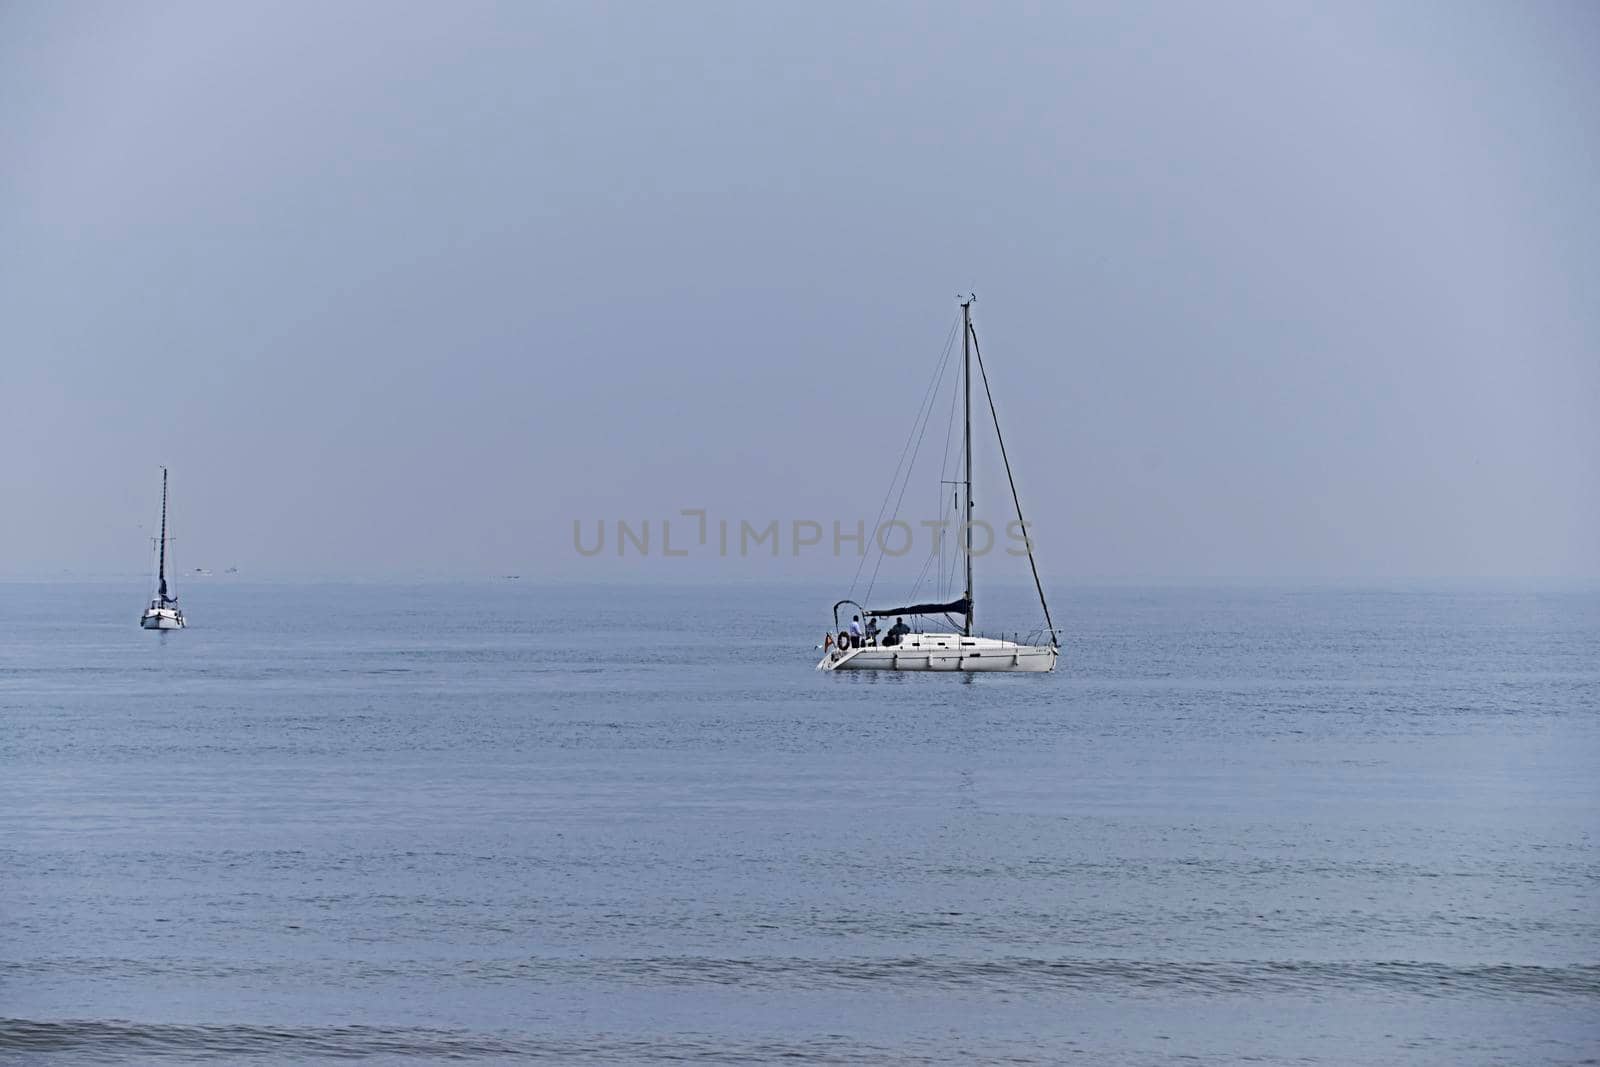 Two sailboats sailing in calm waters, group, sea, ocean, no contrast